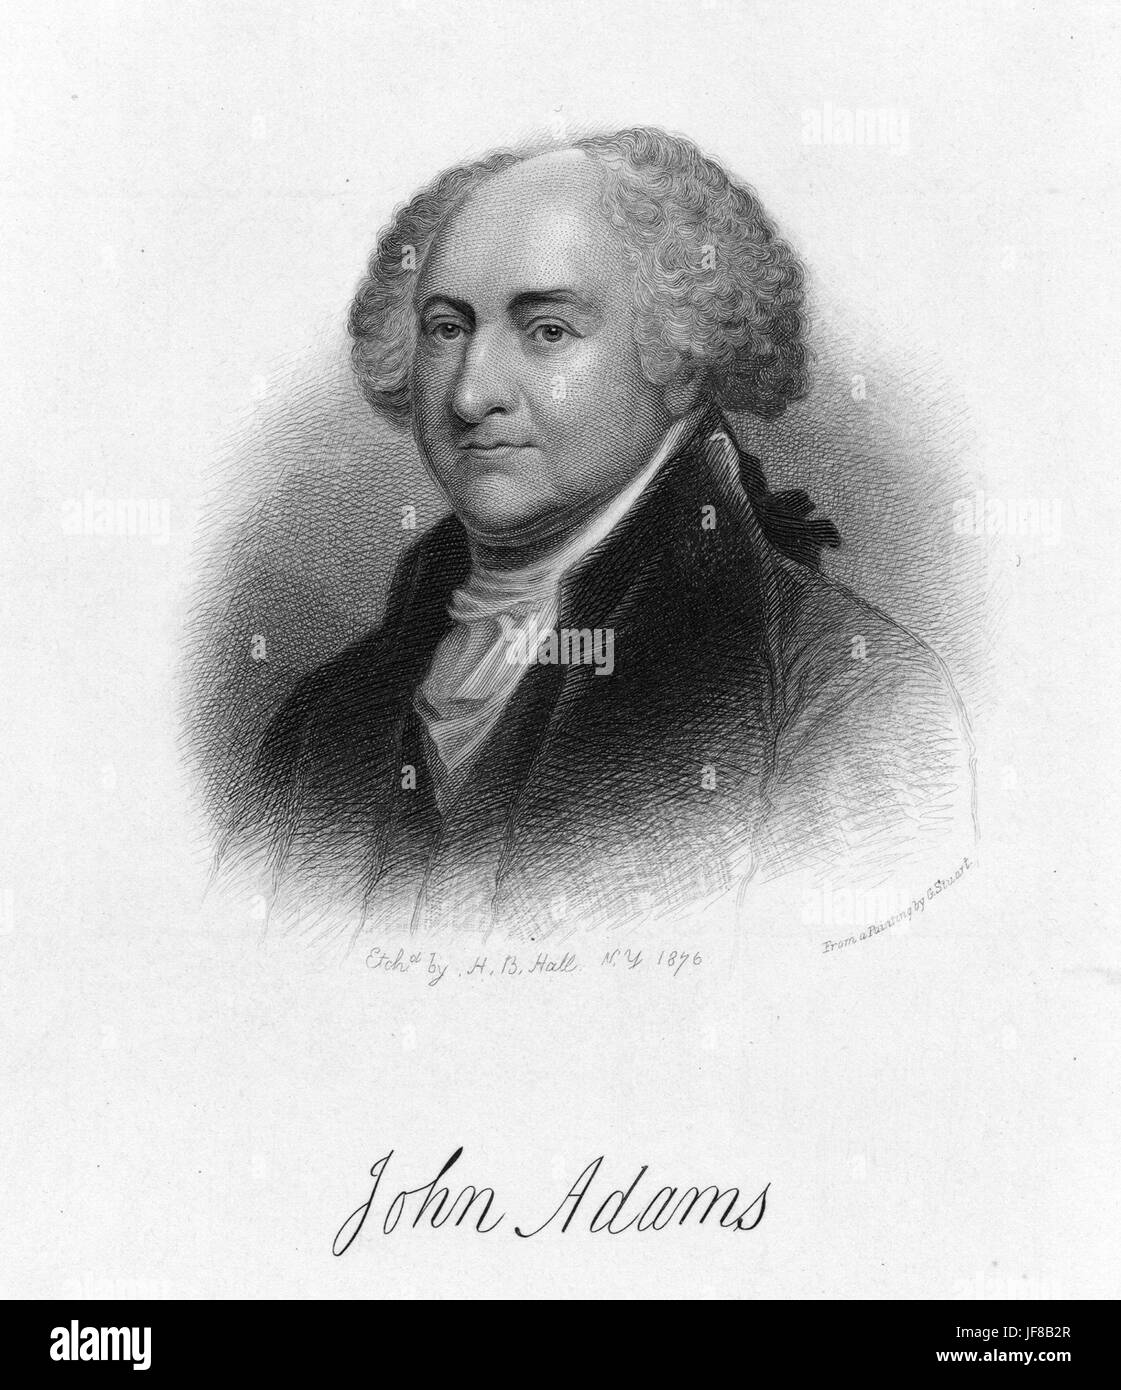 Engraved portrait of John Adams, Founding Father and 2nd President of the United States, 1837. From the New York Public Library. Stock Photo